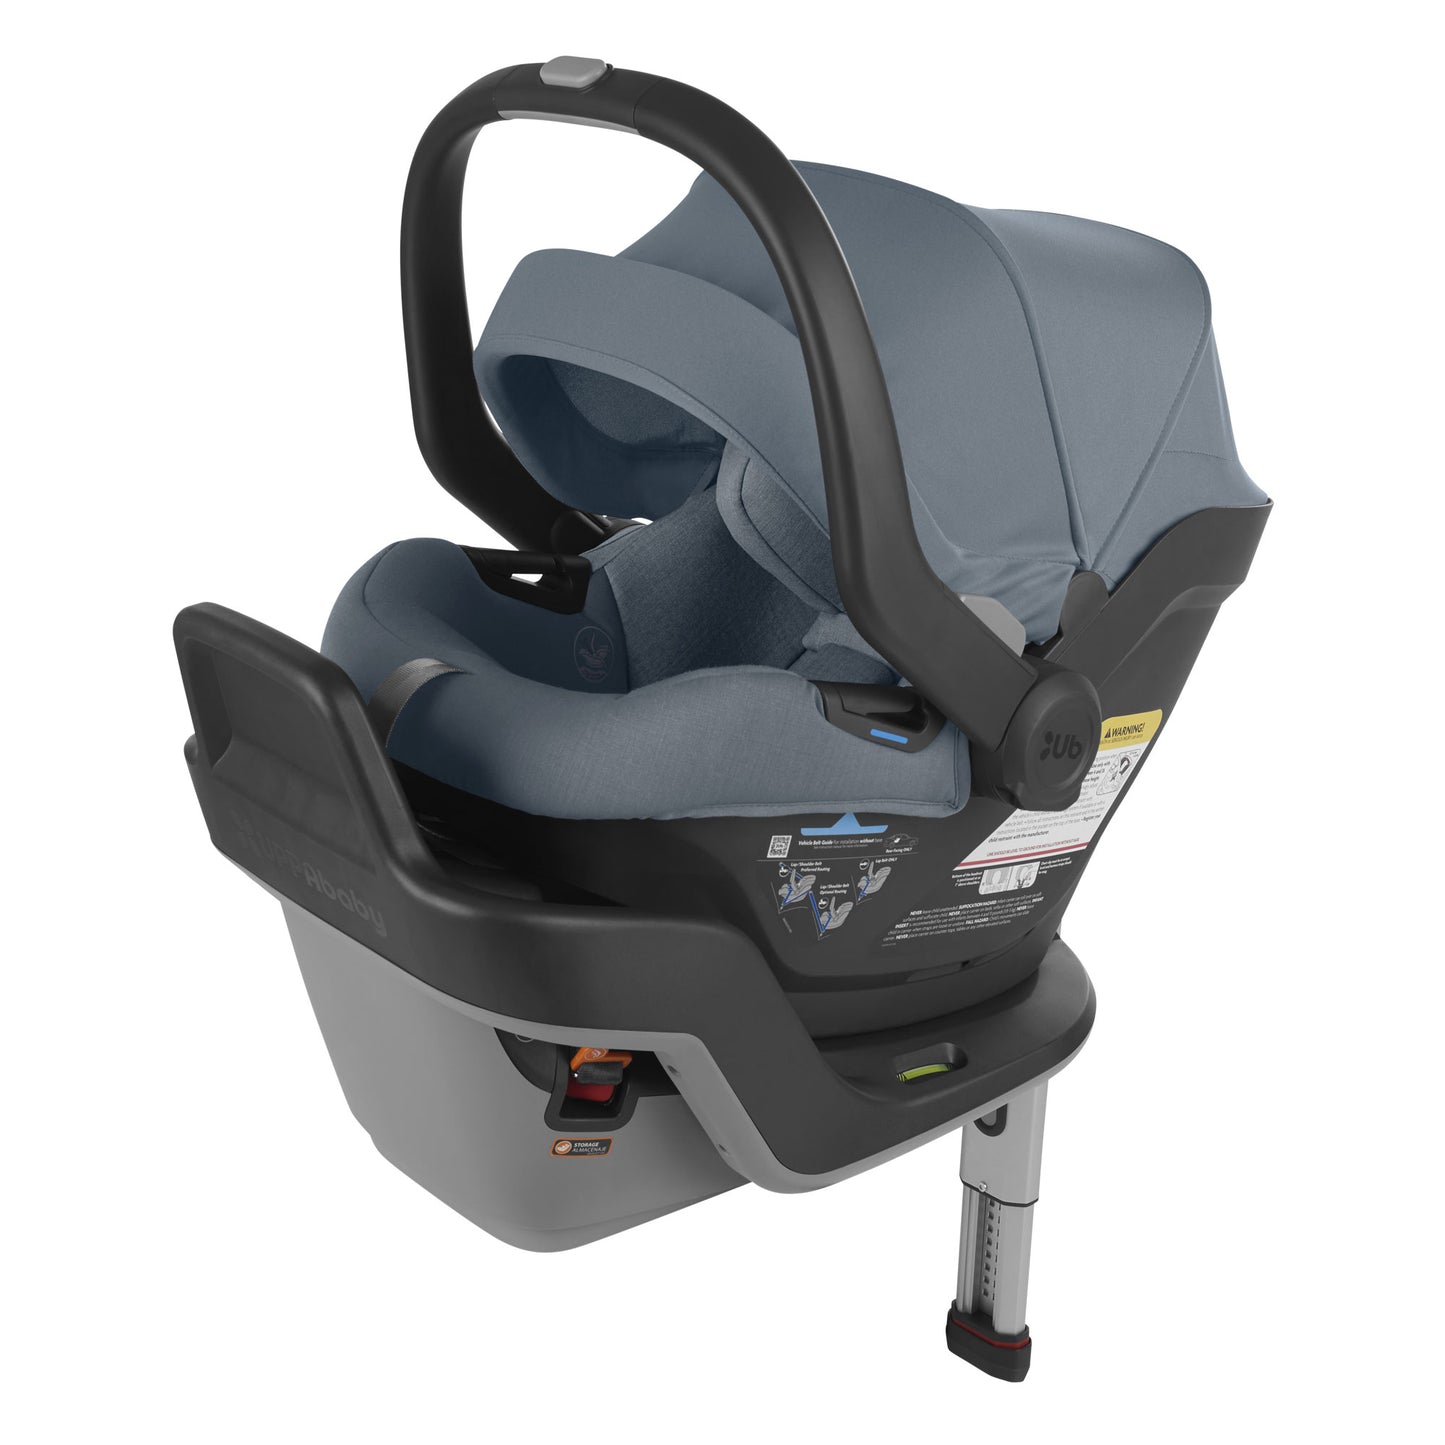 UPPAbaby MESA MAX Infant Car Seat - Gregory